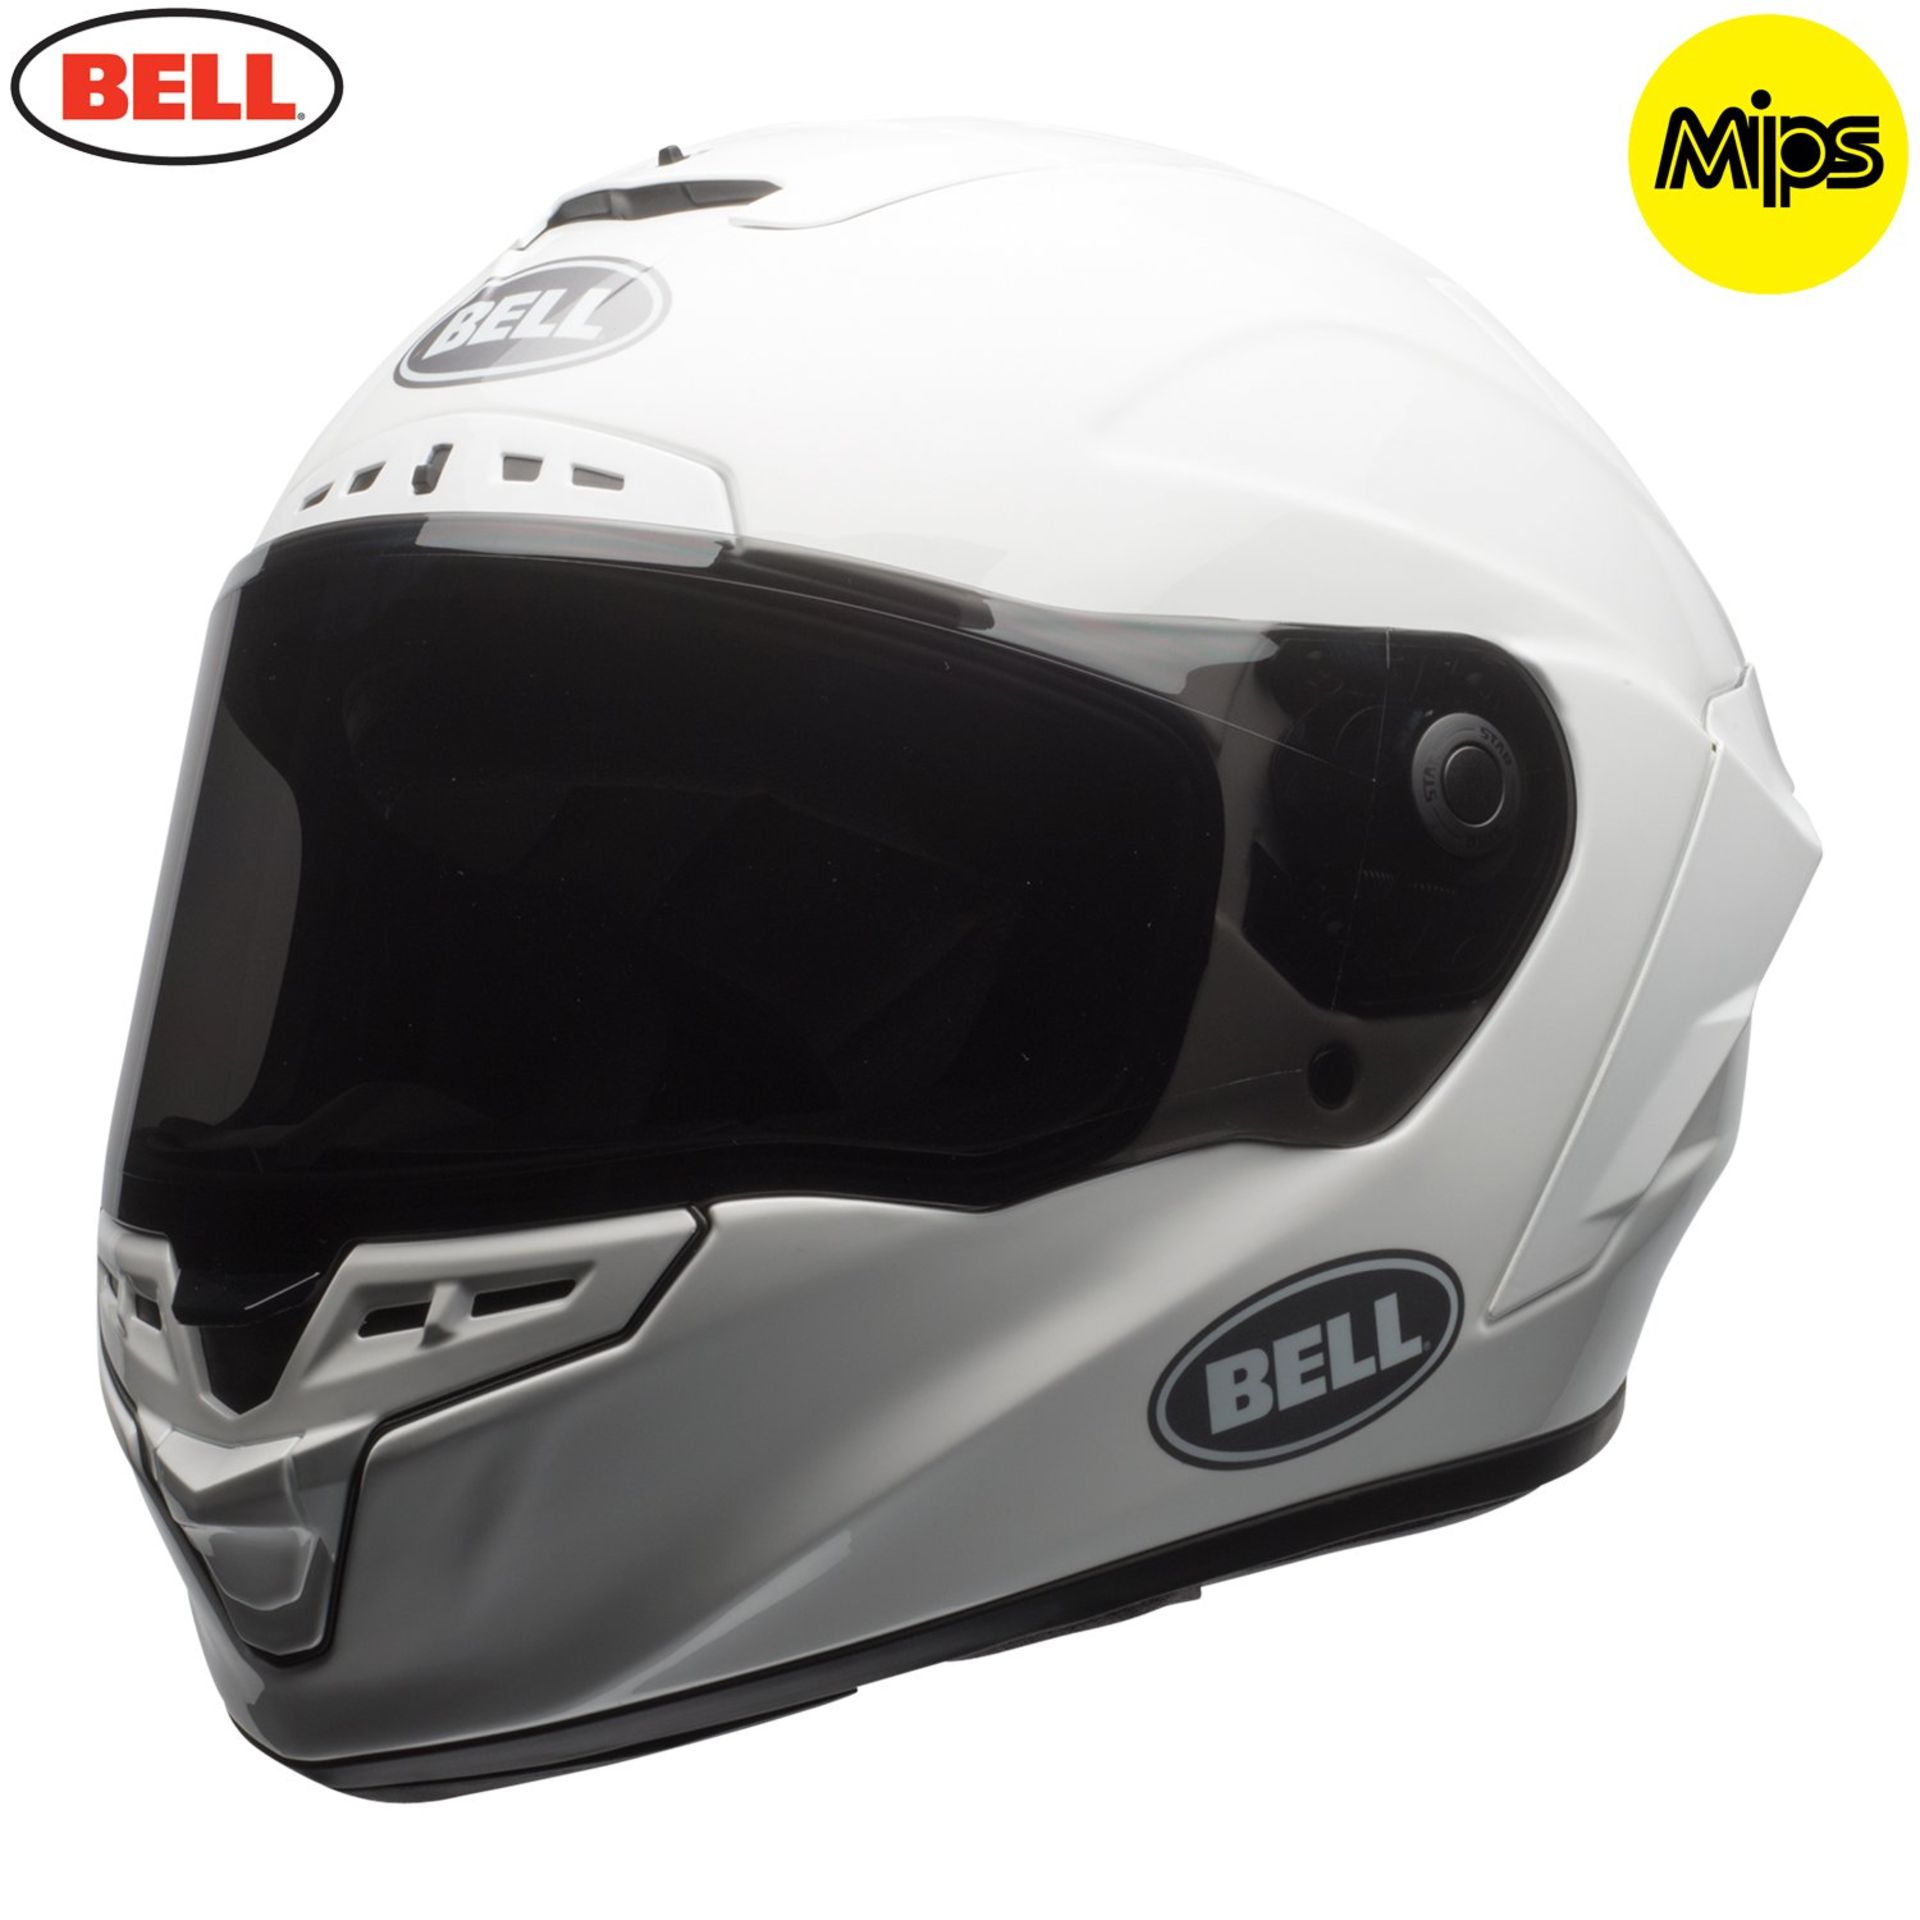 BELL STAR MIPS SOLID WHITE Motorcycle Helmet Size M RRP £399.99